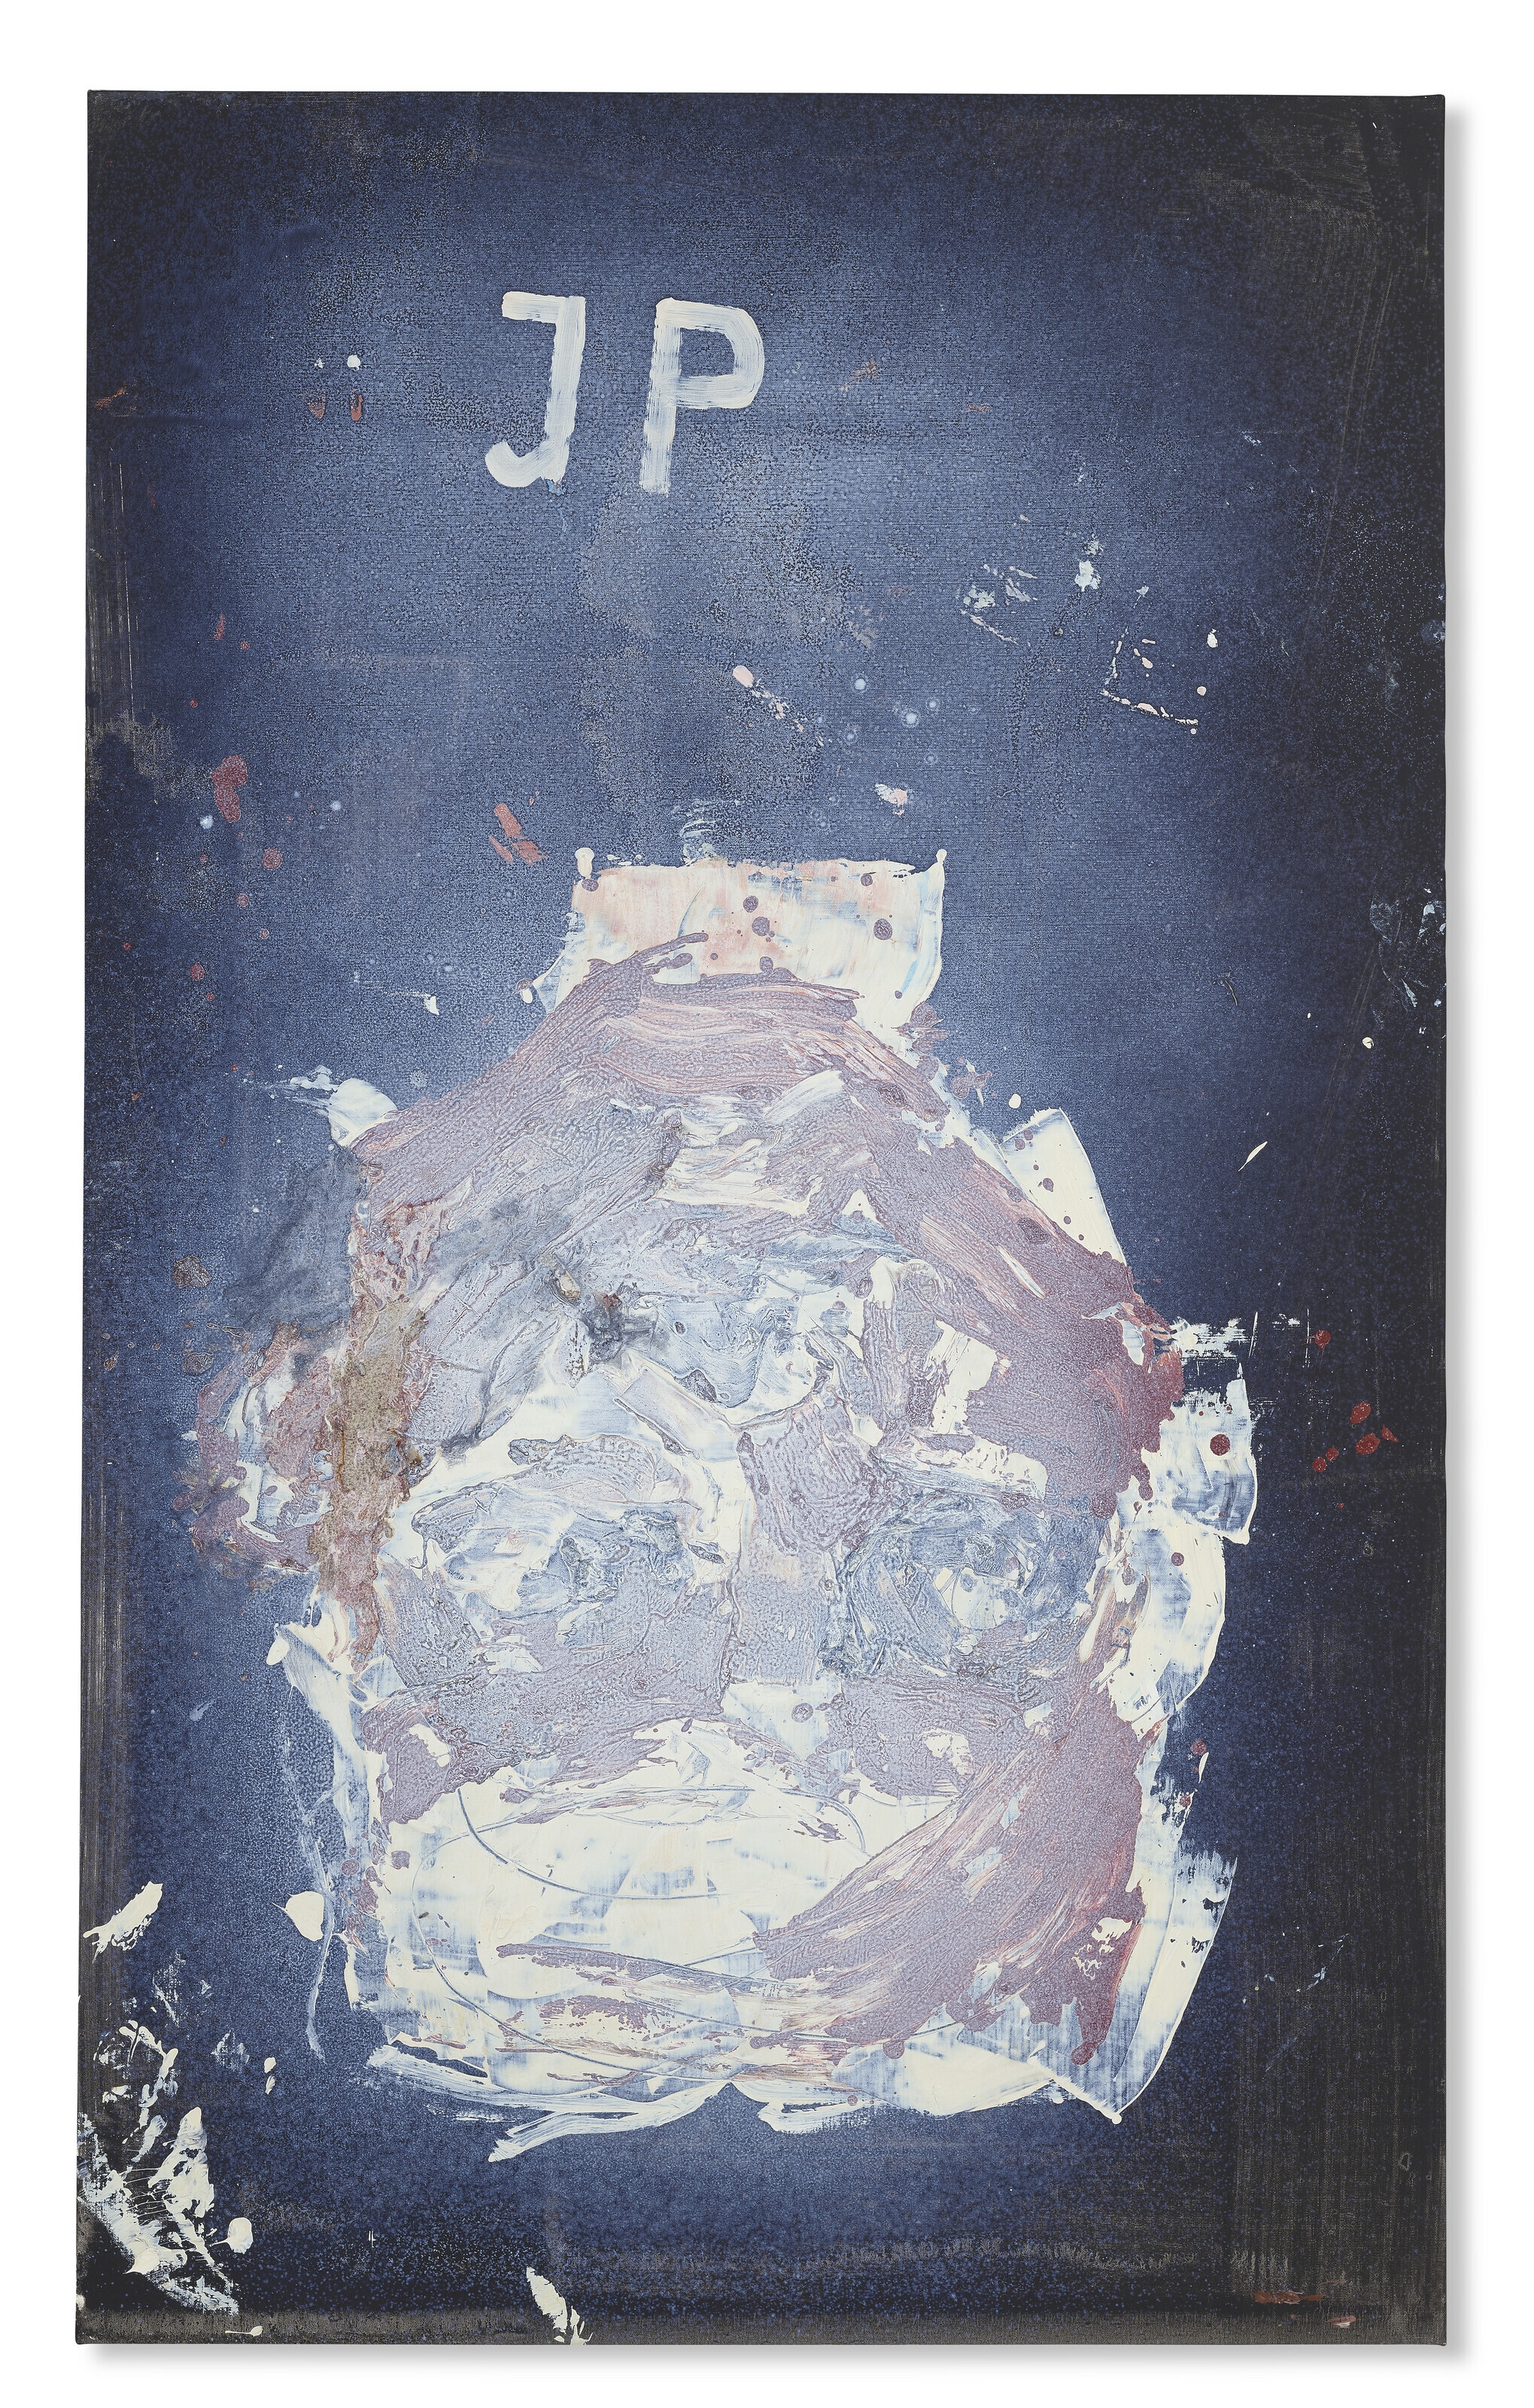 J.P. by Georg Baselitz, 2016, 2018, Painted in 2018